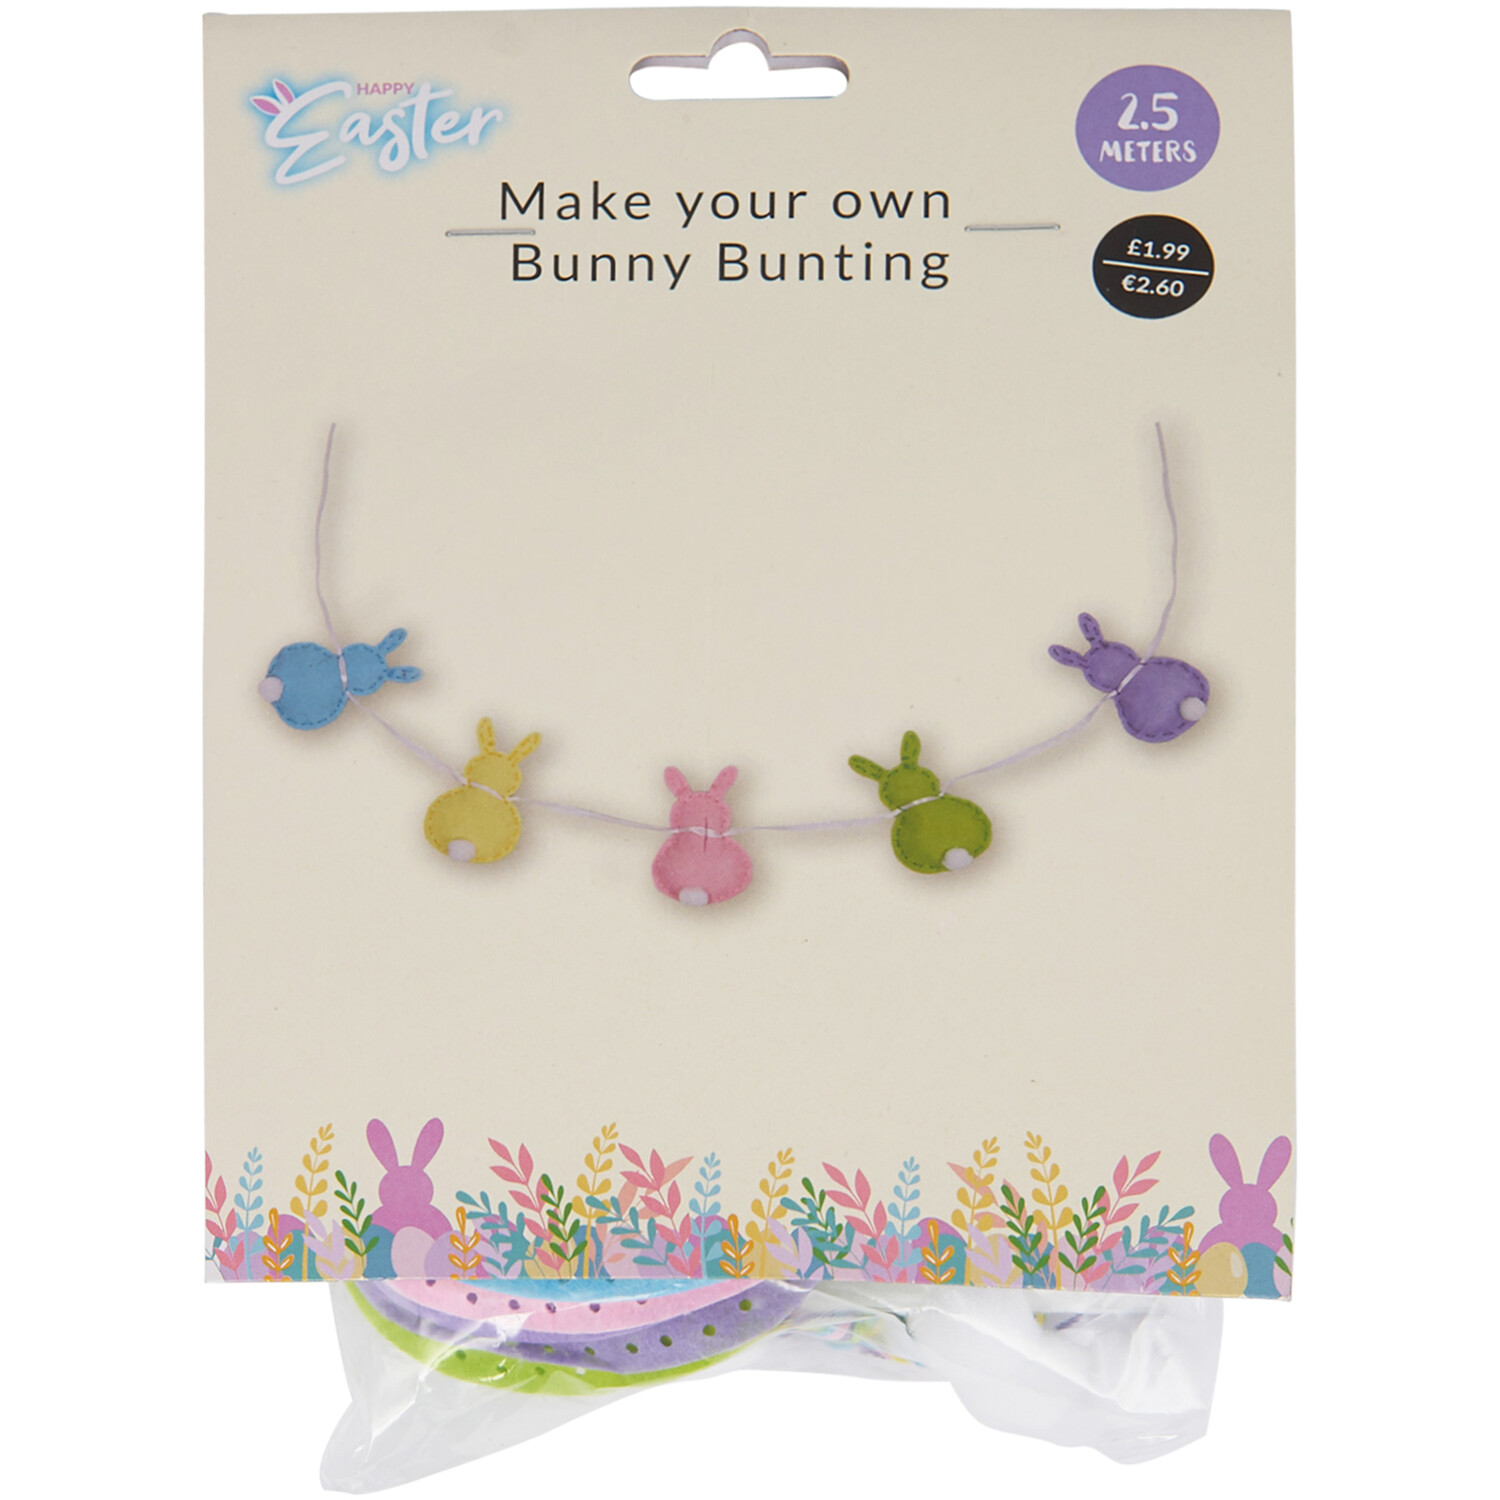 Make Your Own Bunny Bunting Image 1